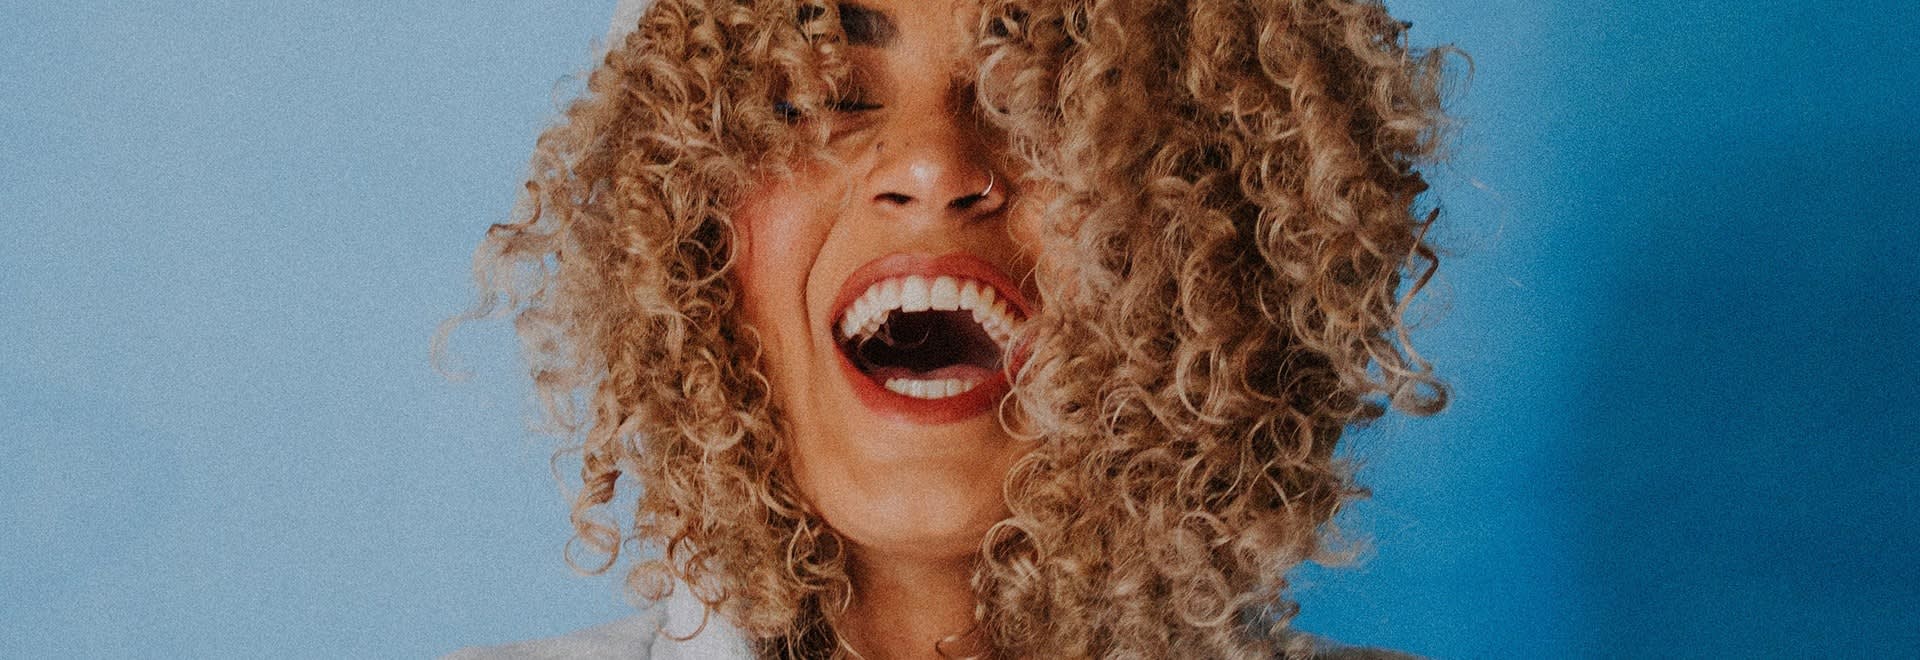 Picture of a smiling woman with very curly, blond hair